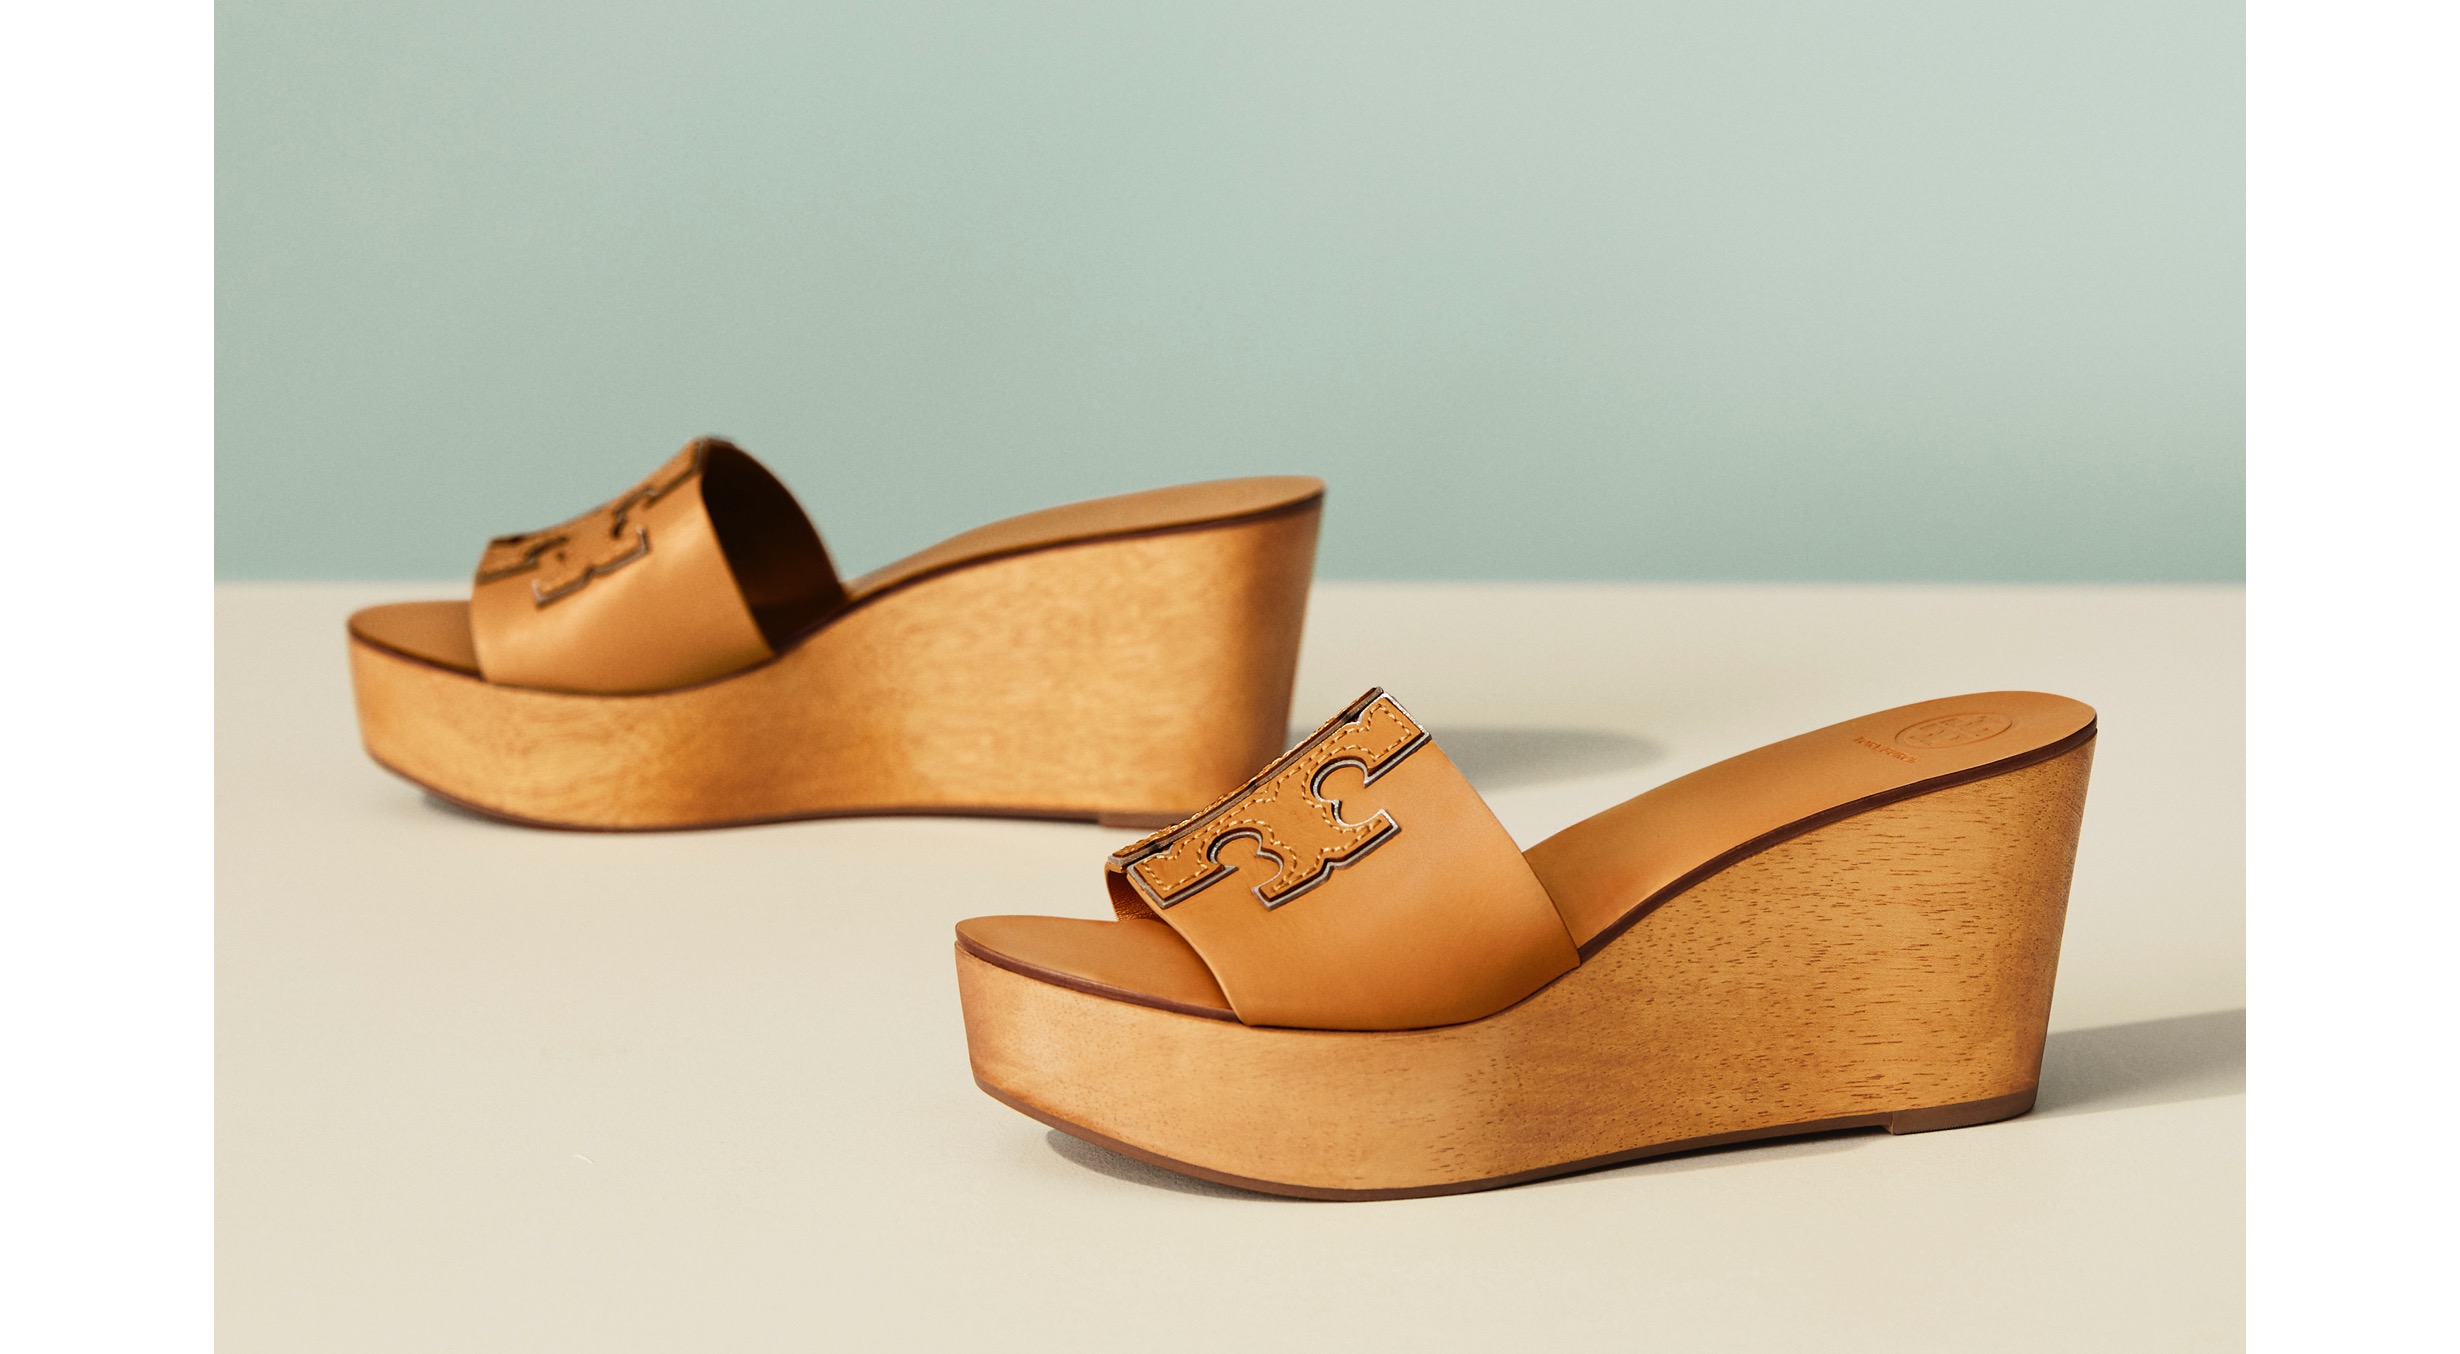 New Women's Designer Shoes for Spring | Tory Burch